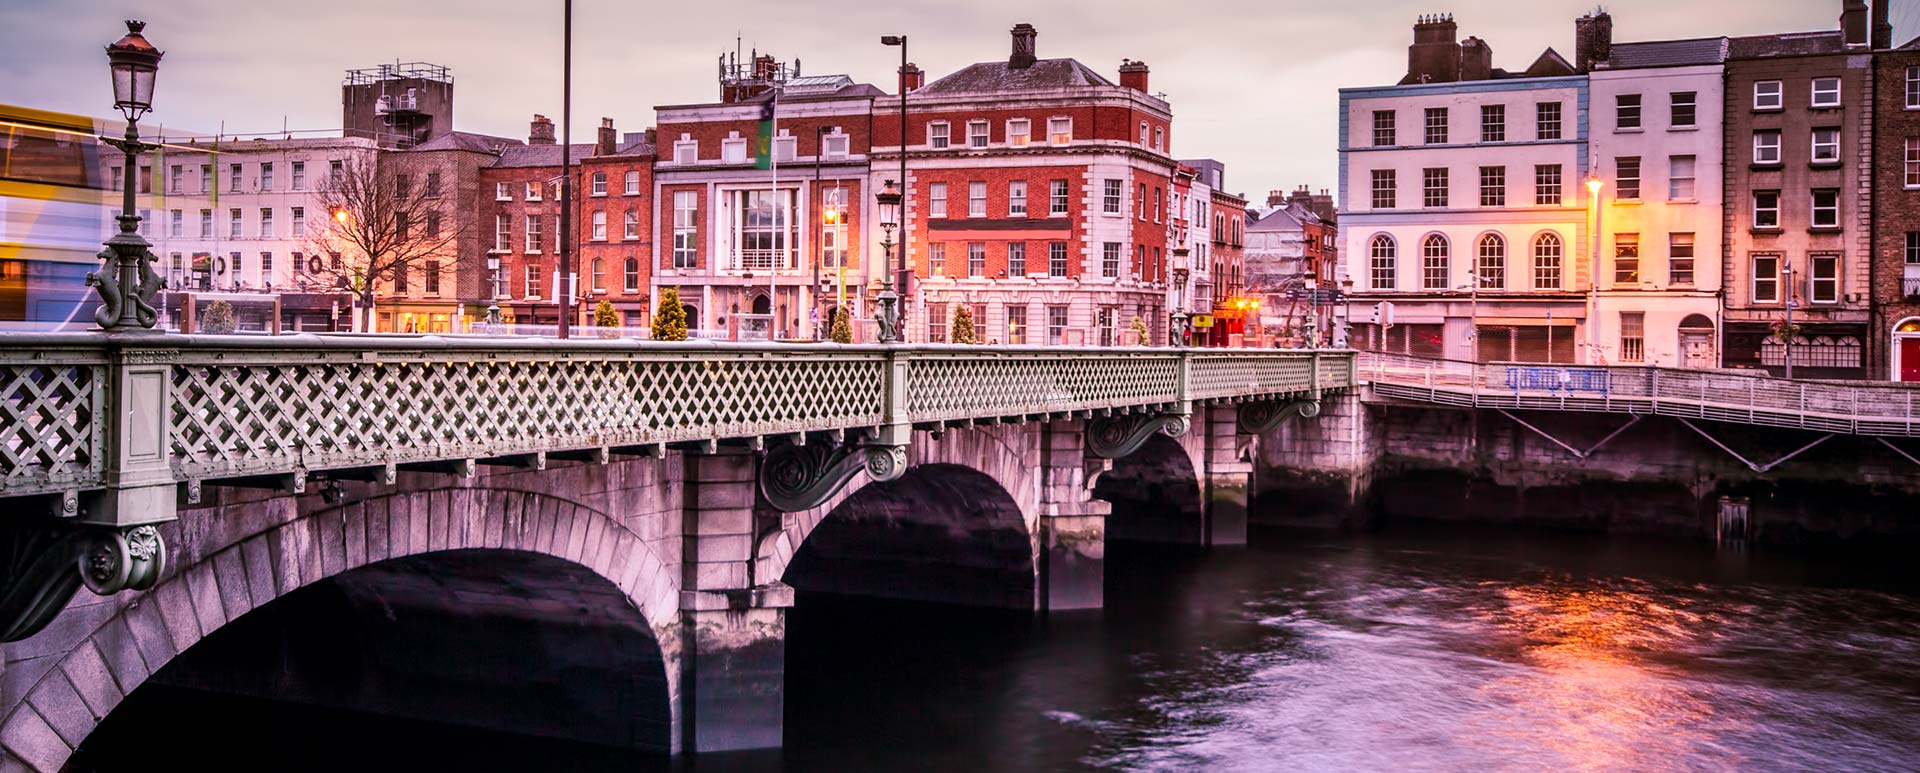 Cheap First and Business Class Flights to Ireland - I Fly First Class